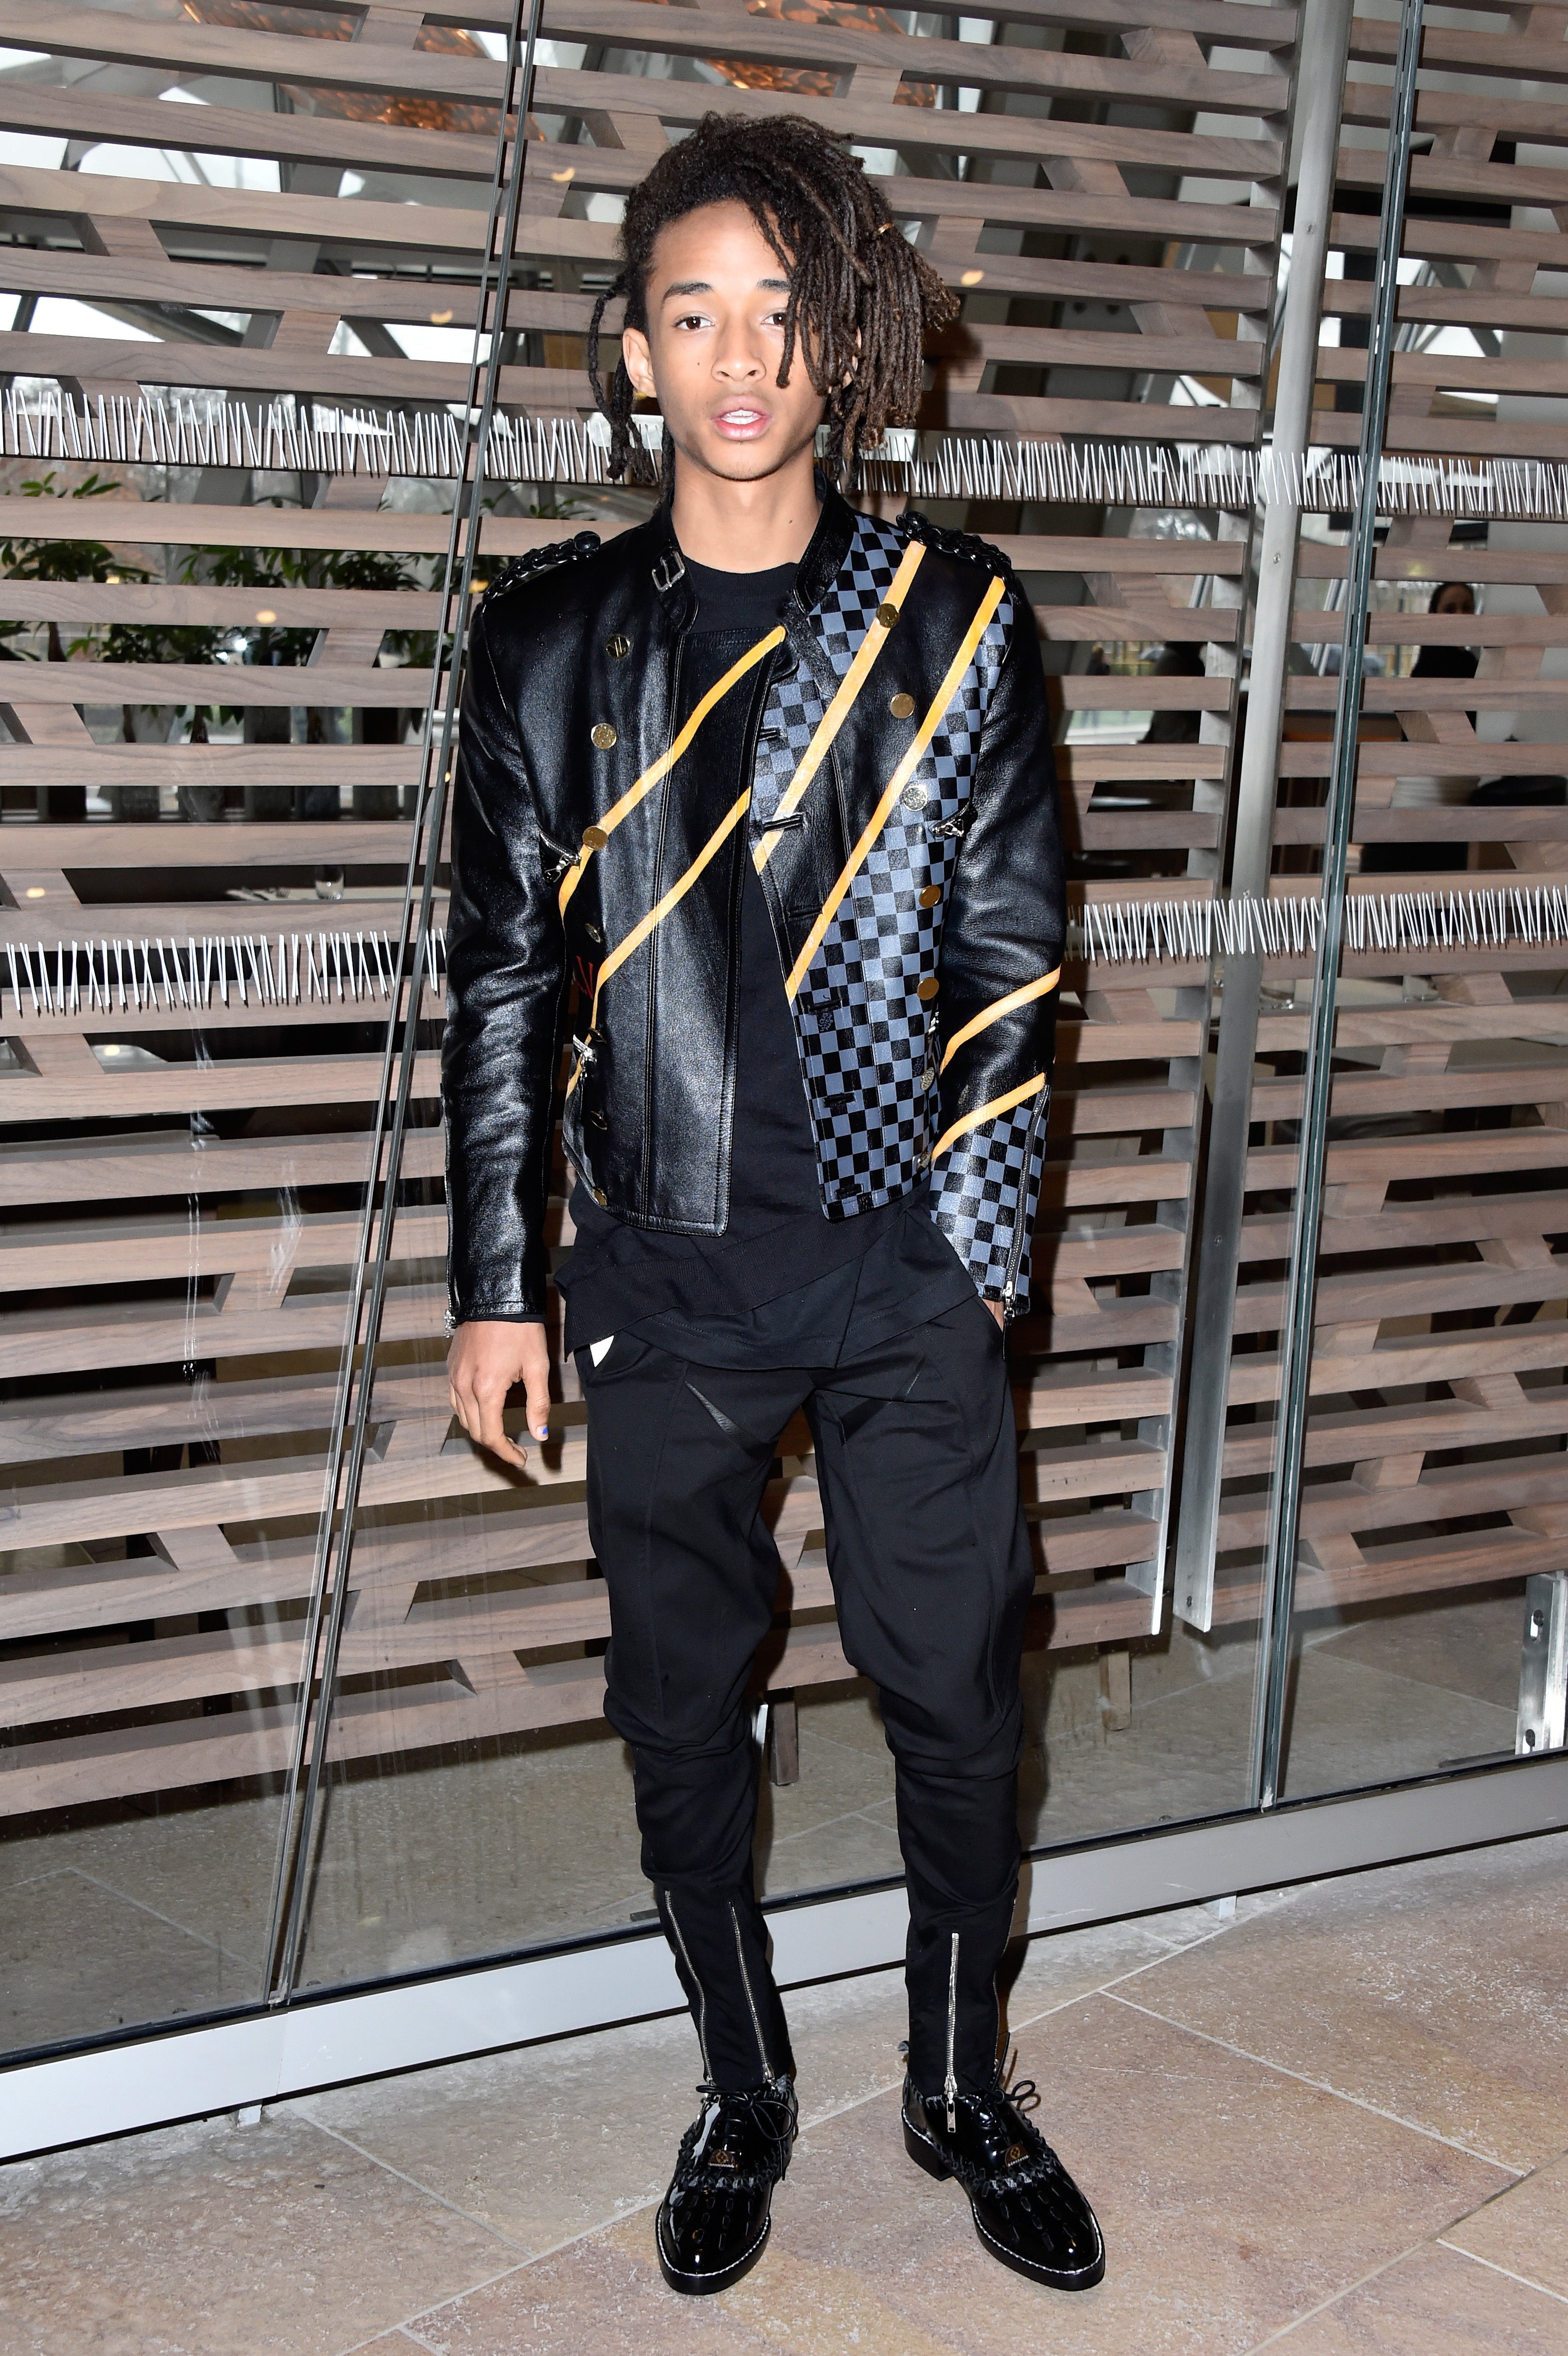 Jaden Smith on Fashion: 'I Don't See Man Clothes and Woman Clothes